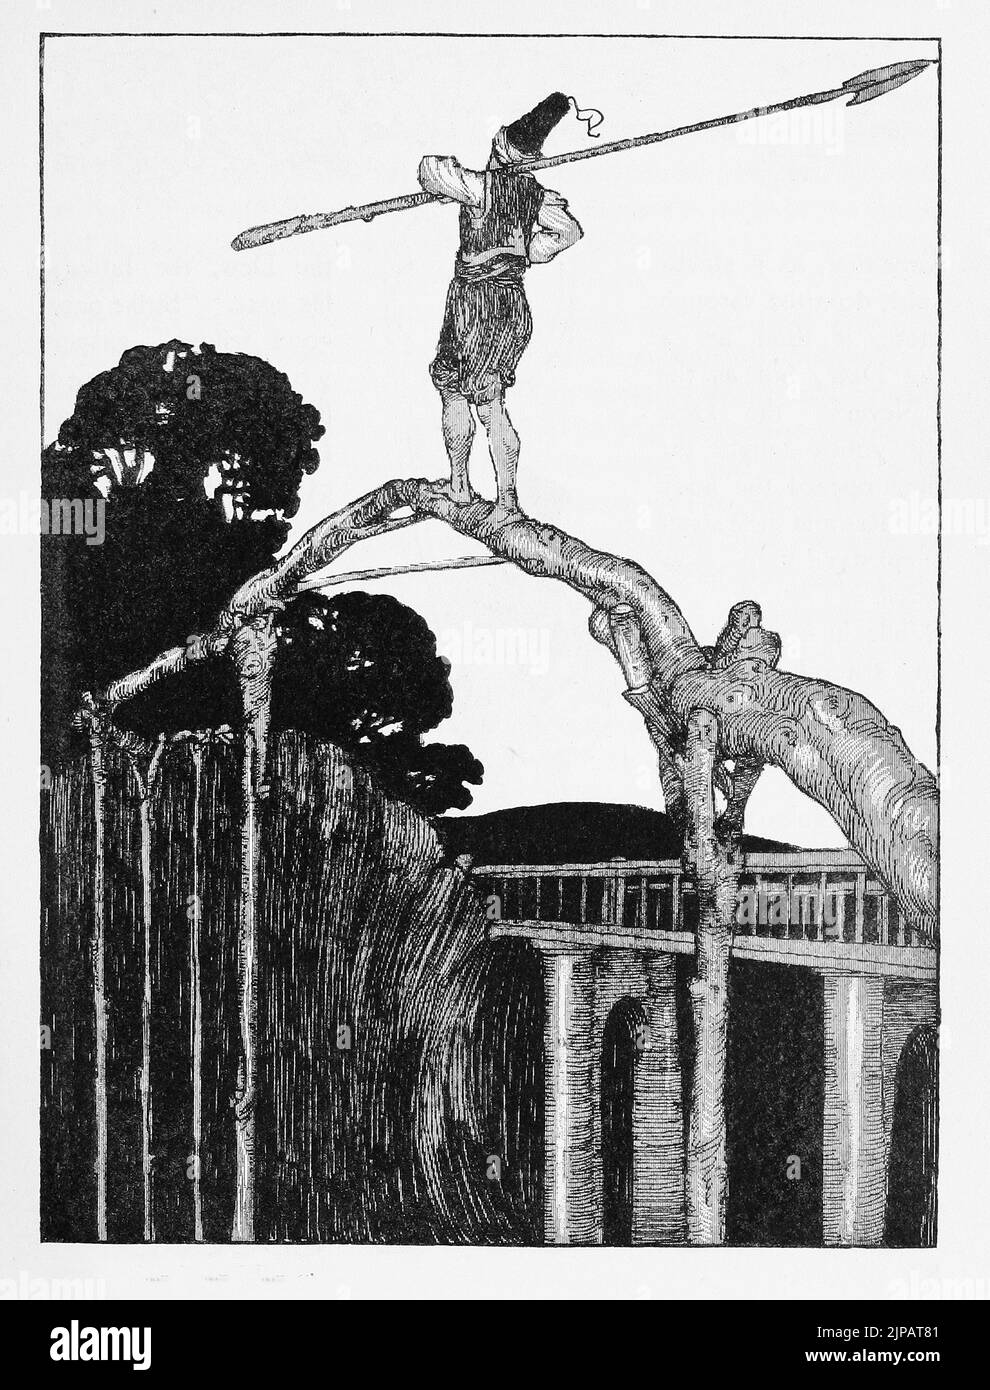 The Simpleton - He chose the wooden bridge. Illustration by Willy Pogany from 'Forty-four Turkish Fairy Tales' (1913) by Ignác Kúnos Stock Photo